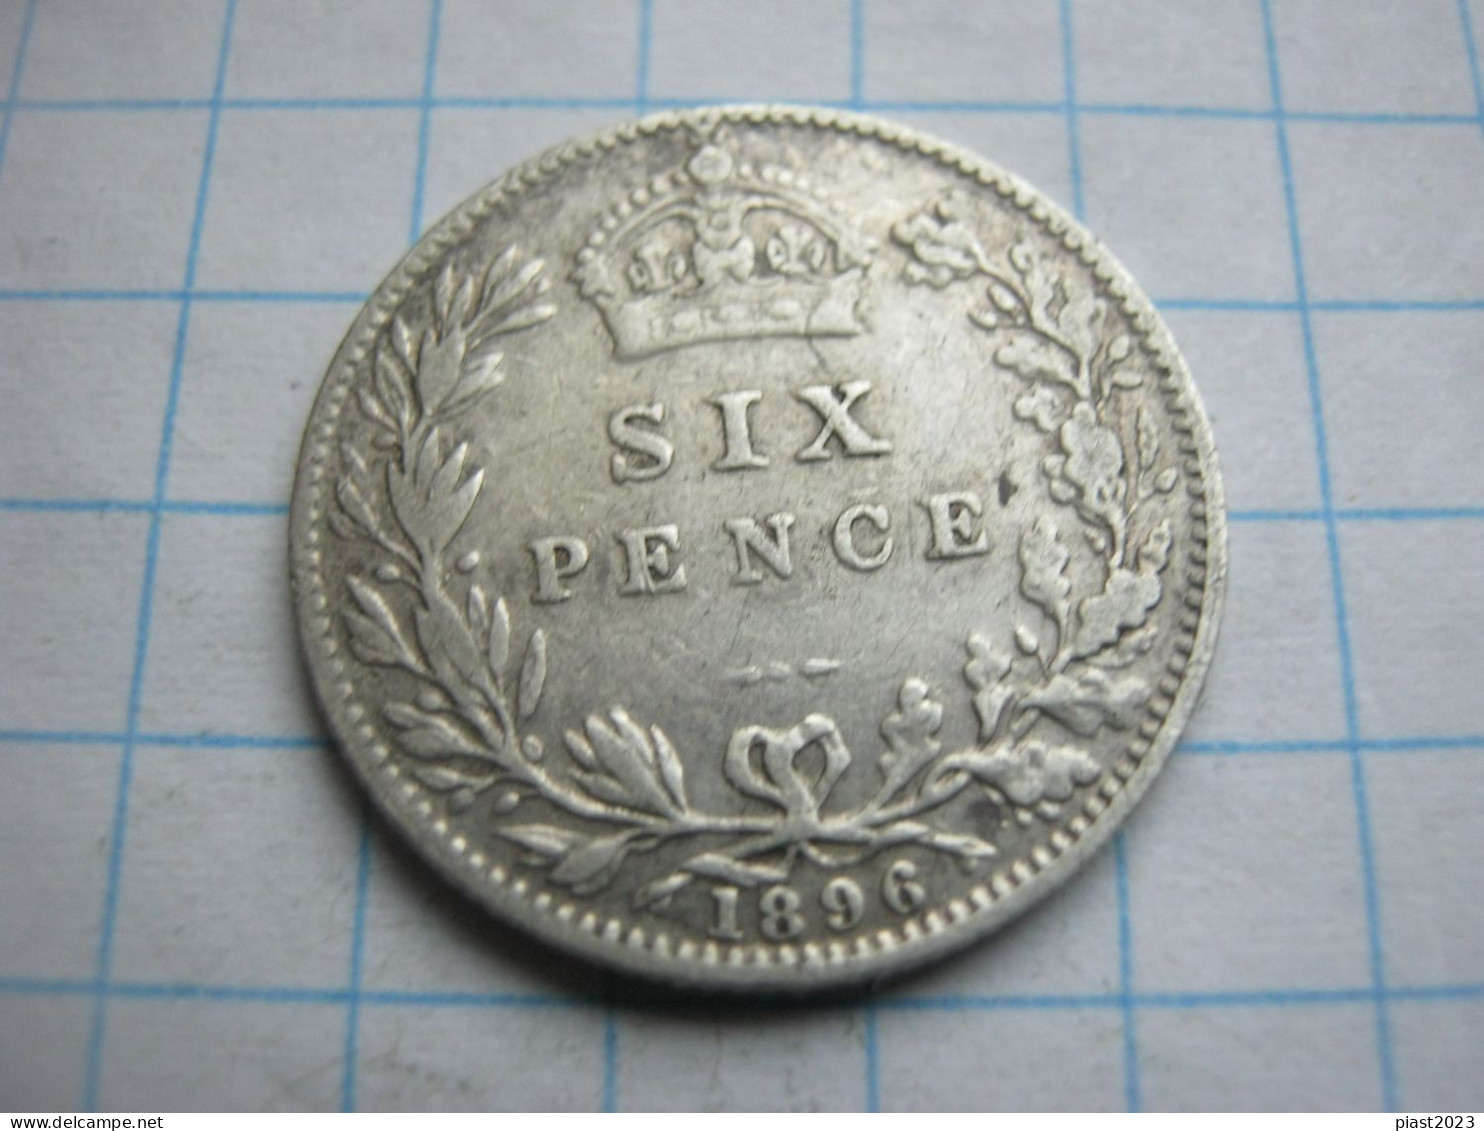 Great Britain 6 Pence 1896 - H. 6 Pence